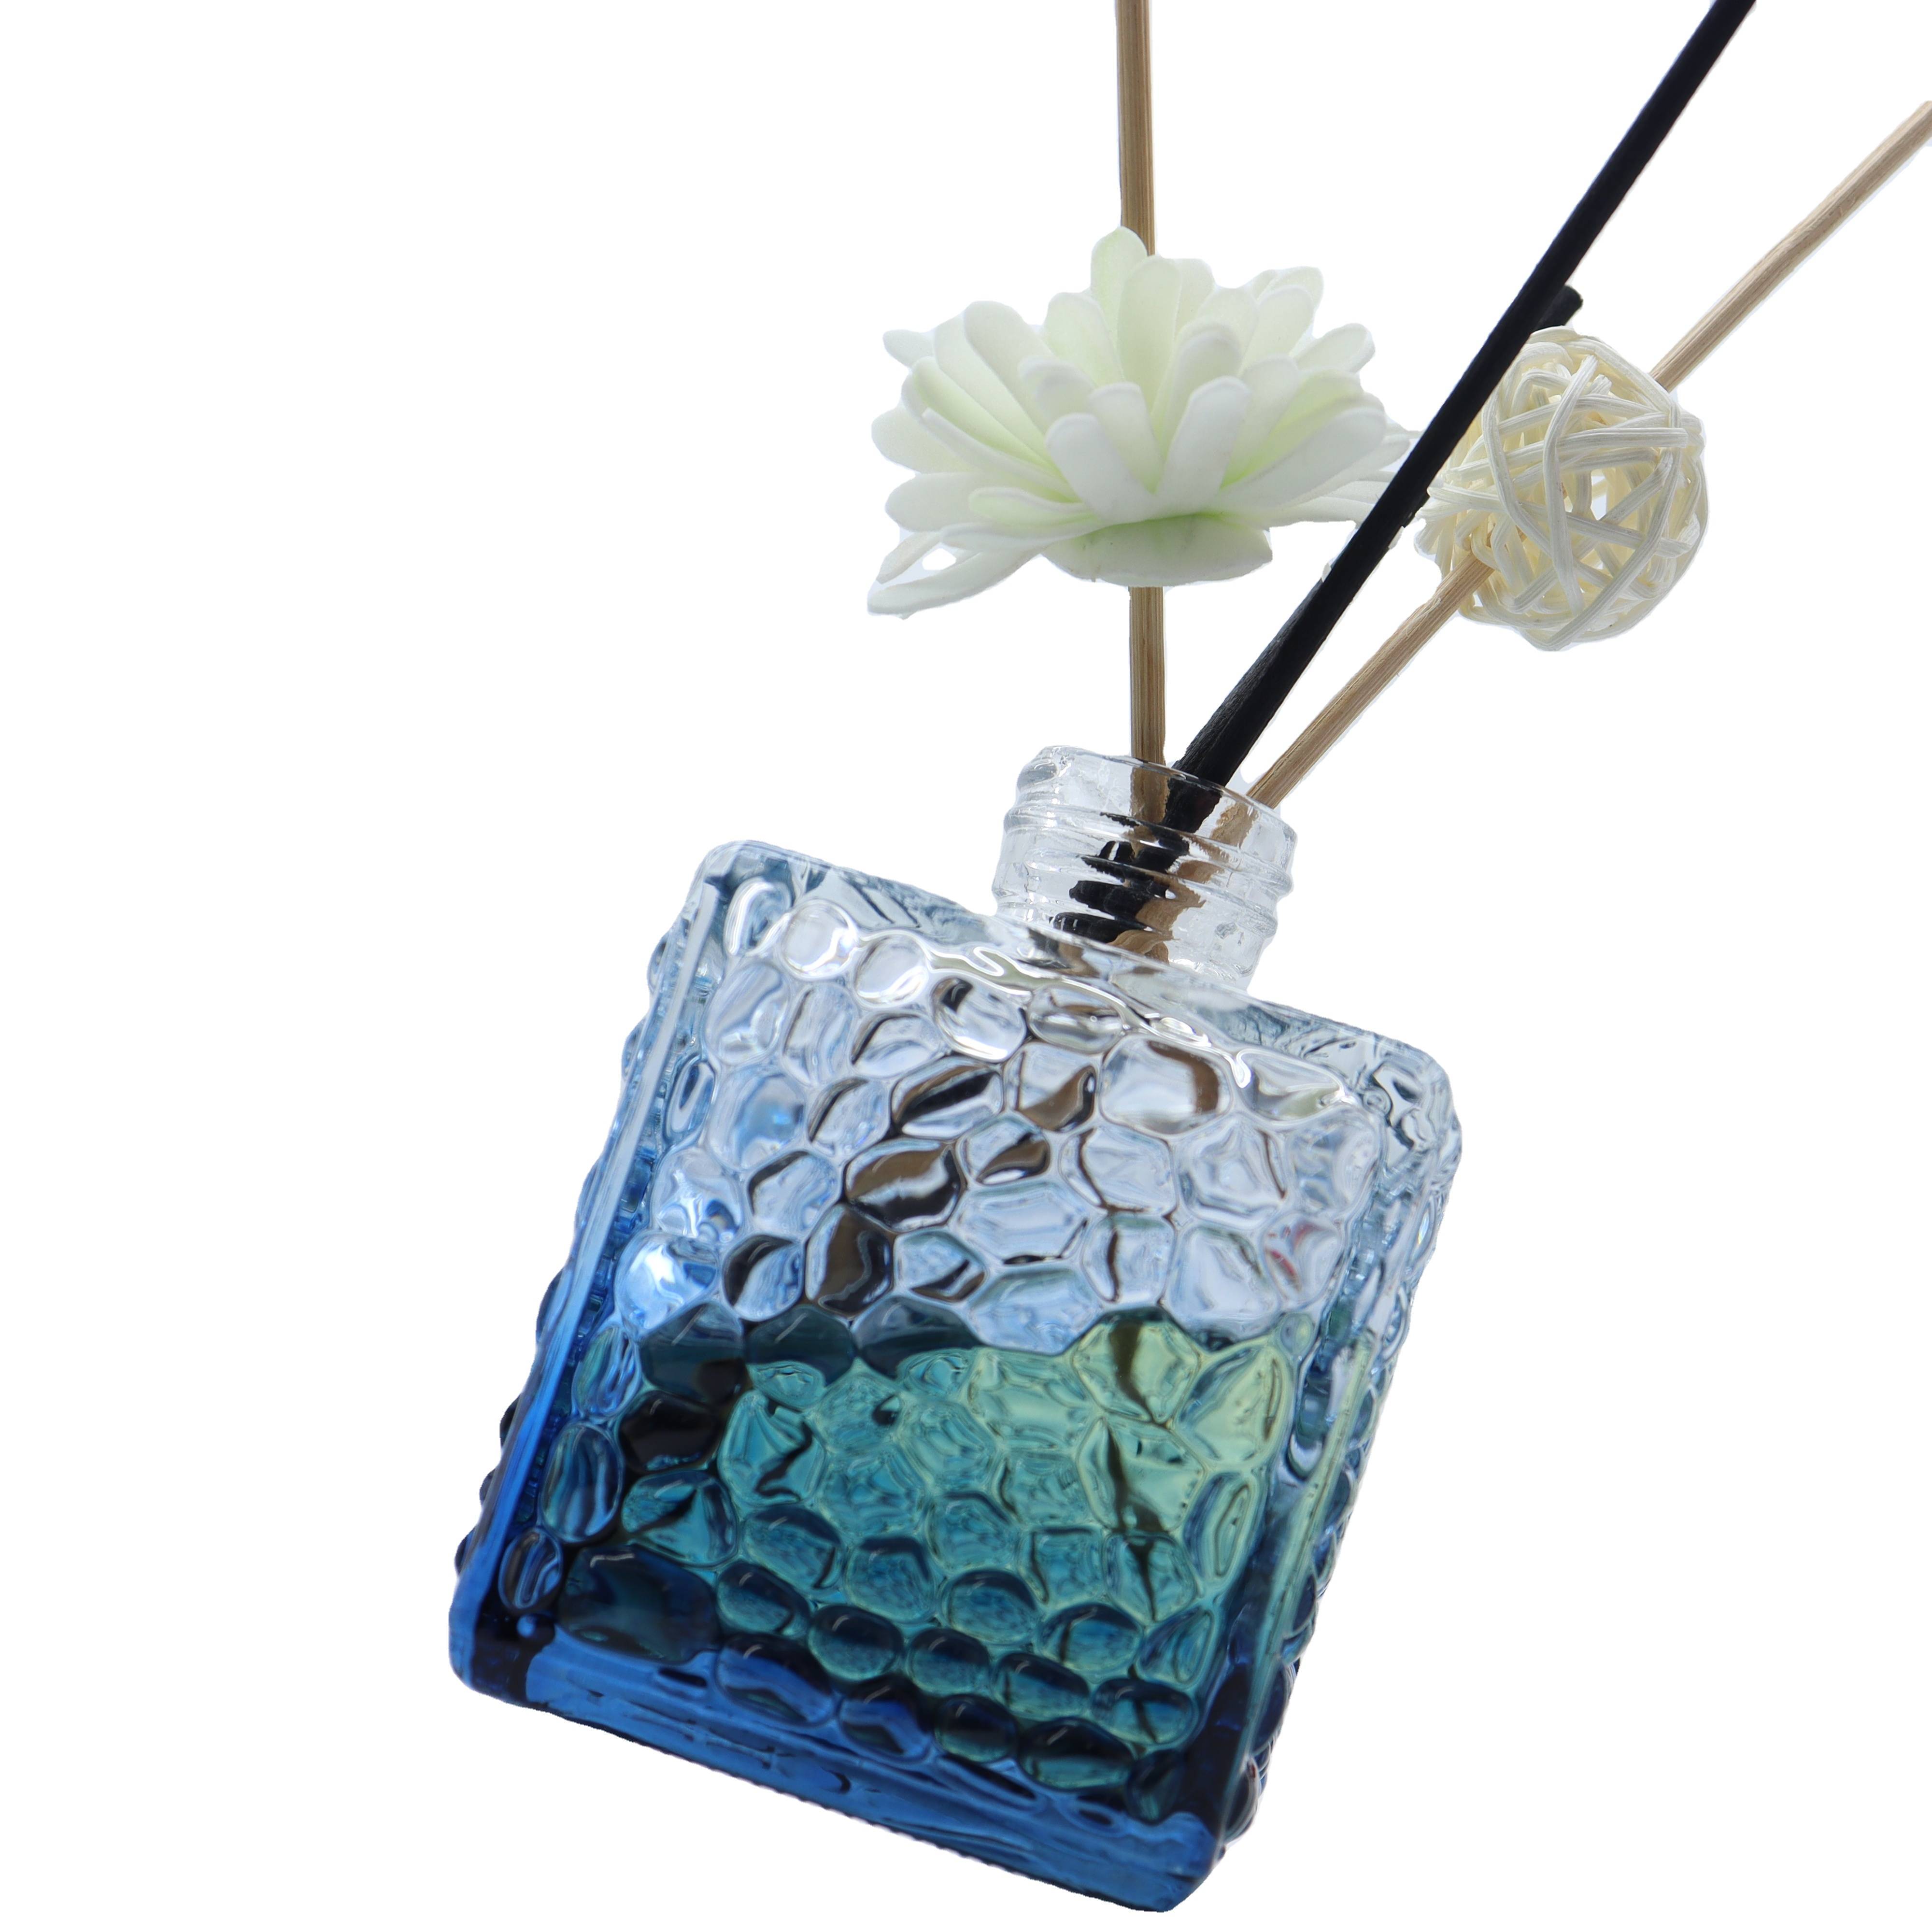 Cut Surface Square Spray Black Or Any Color Empty Bottle For Reed Diffuser Aroma Bottles Featured Image